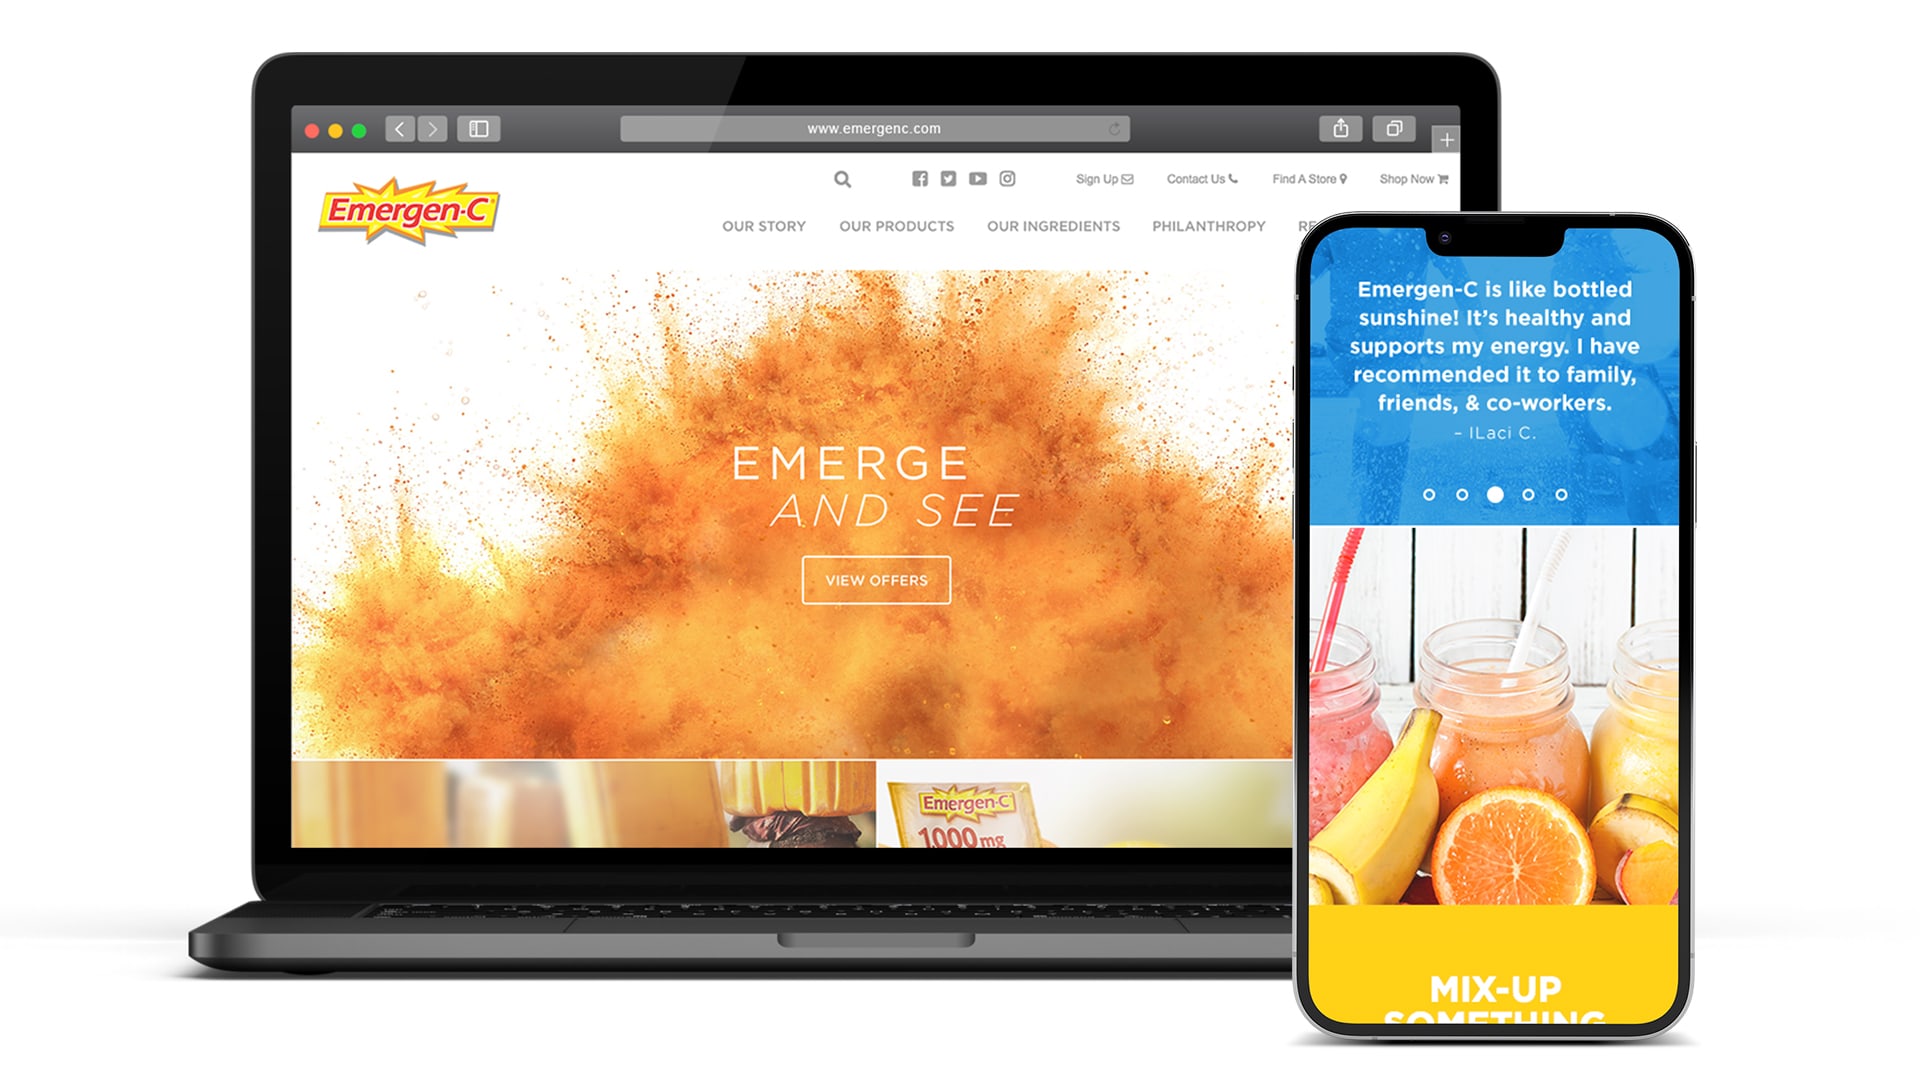 emergenc.com website on a laptop and iphone